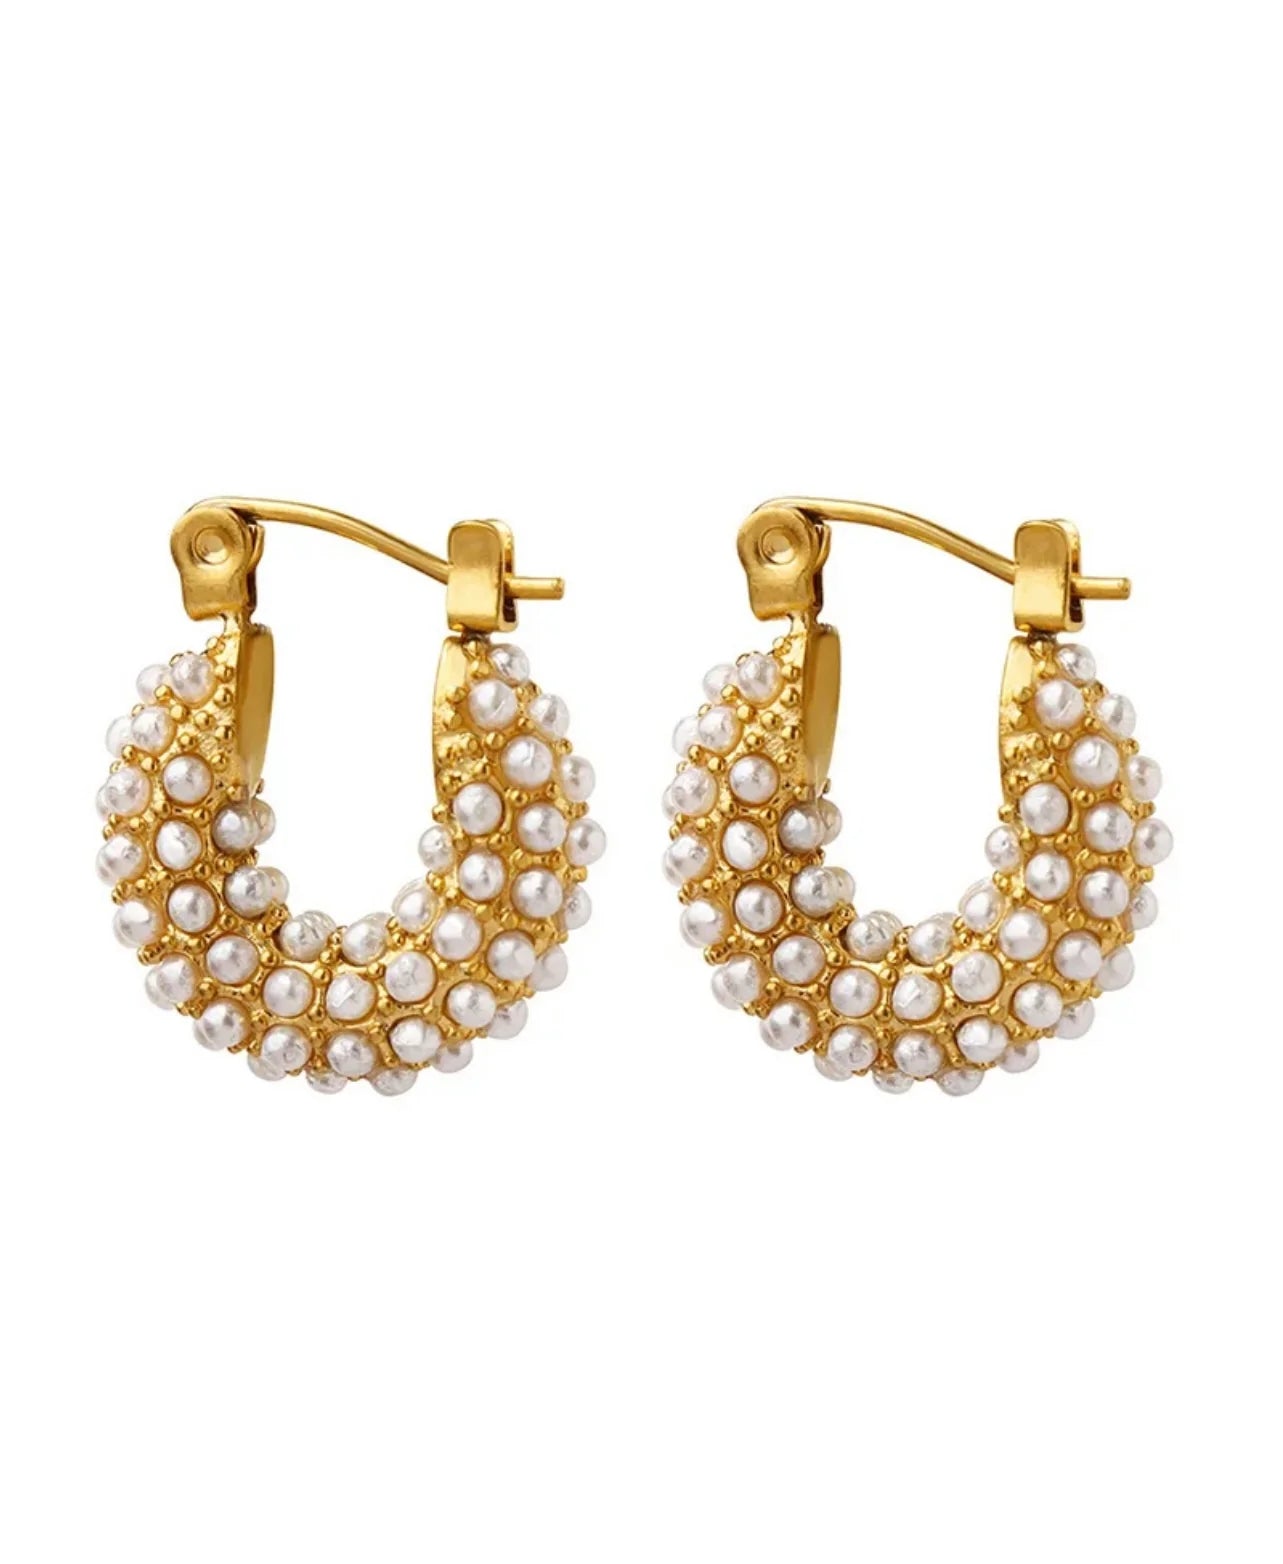 The Dainty Gold Pearl Hoops